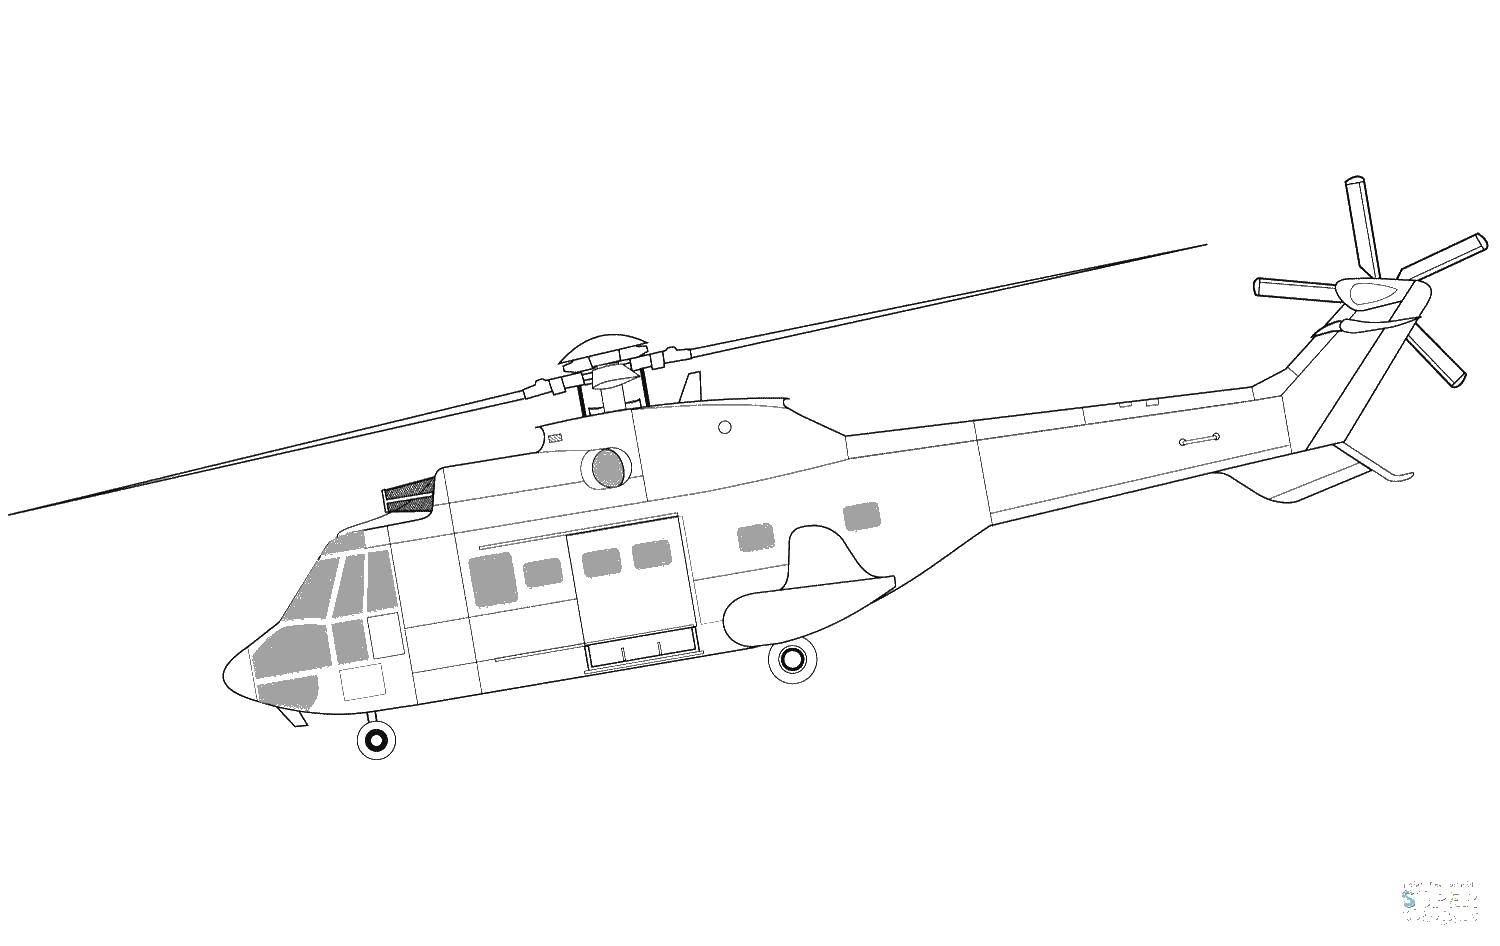 Coloring The helicopter flies in the sky. Category Helicopters. Tags:  Gunship.